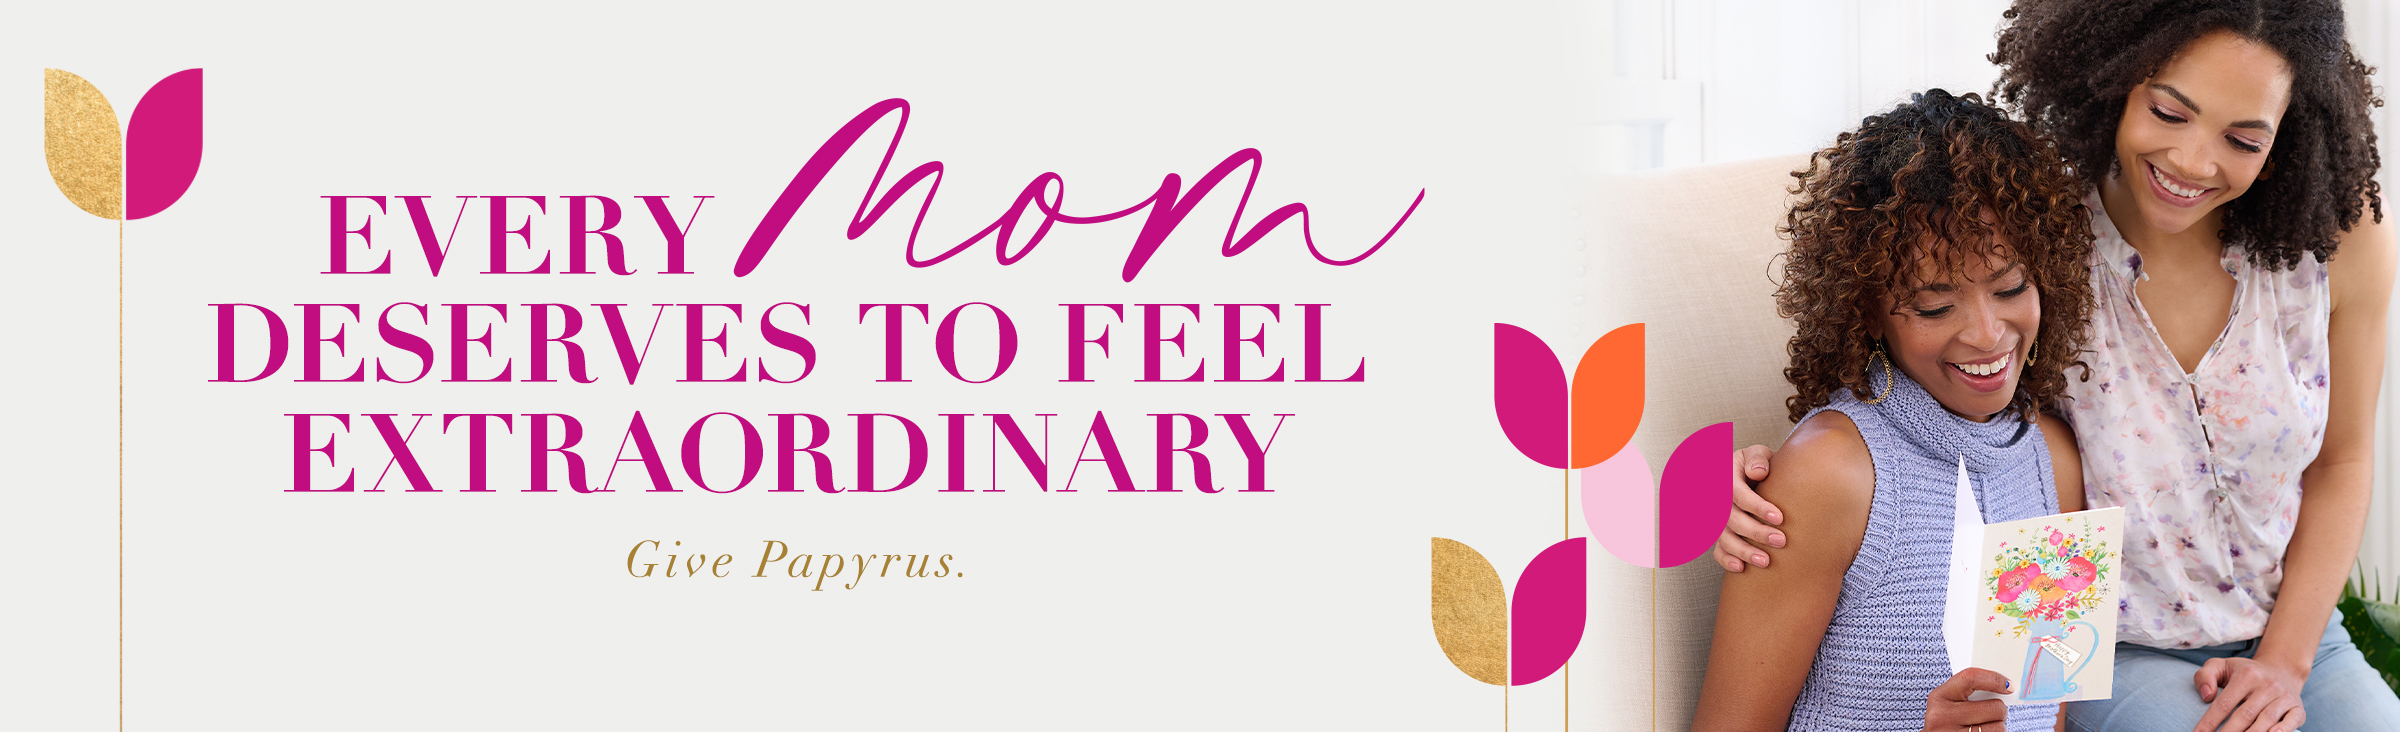 Every mom deserves to feel extraordinary Give Papyrus.